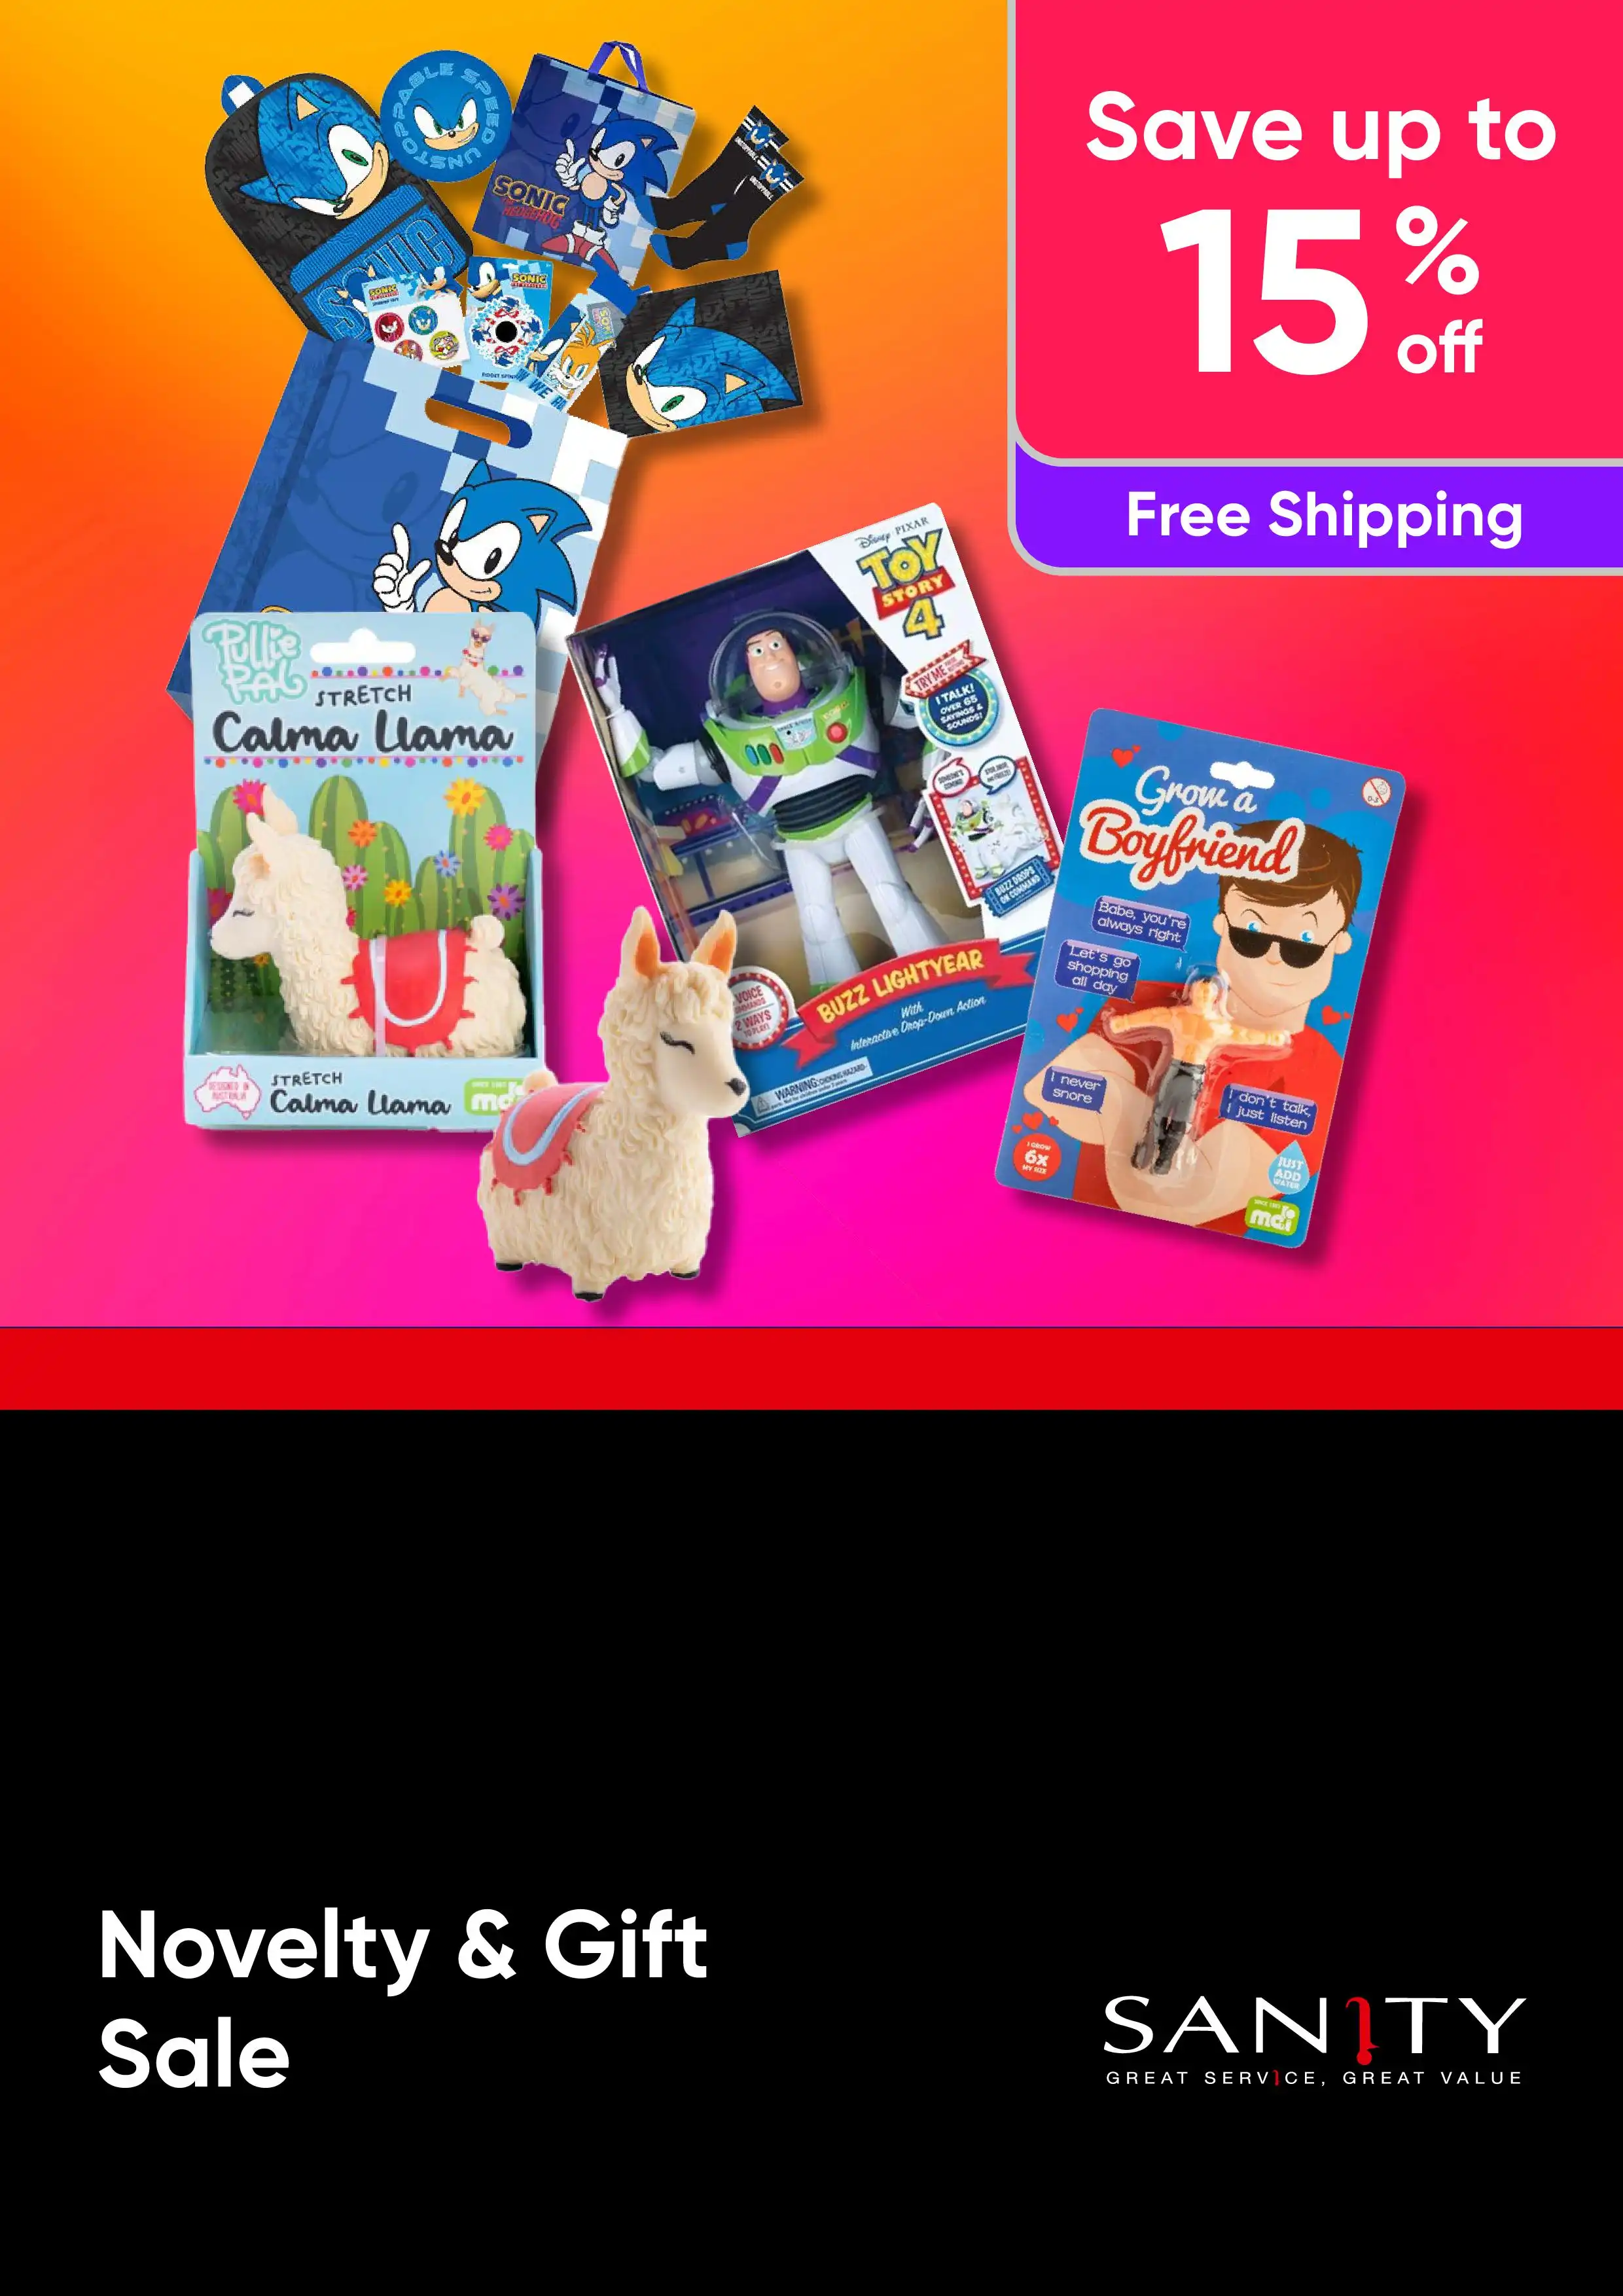 Novelty & Gift Sale - Stress Toys and More - William Valentine - Up to 15% off